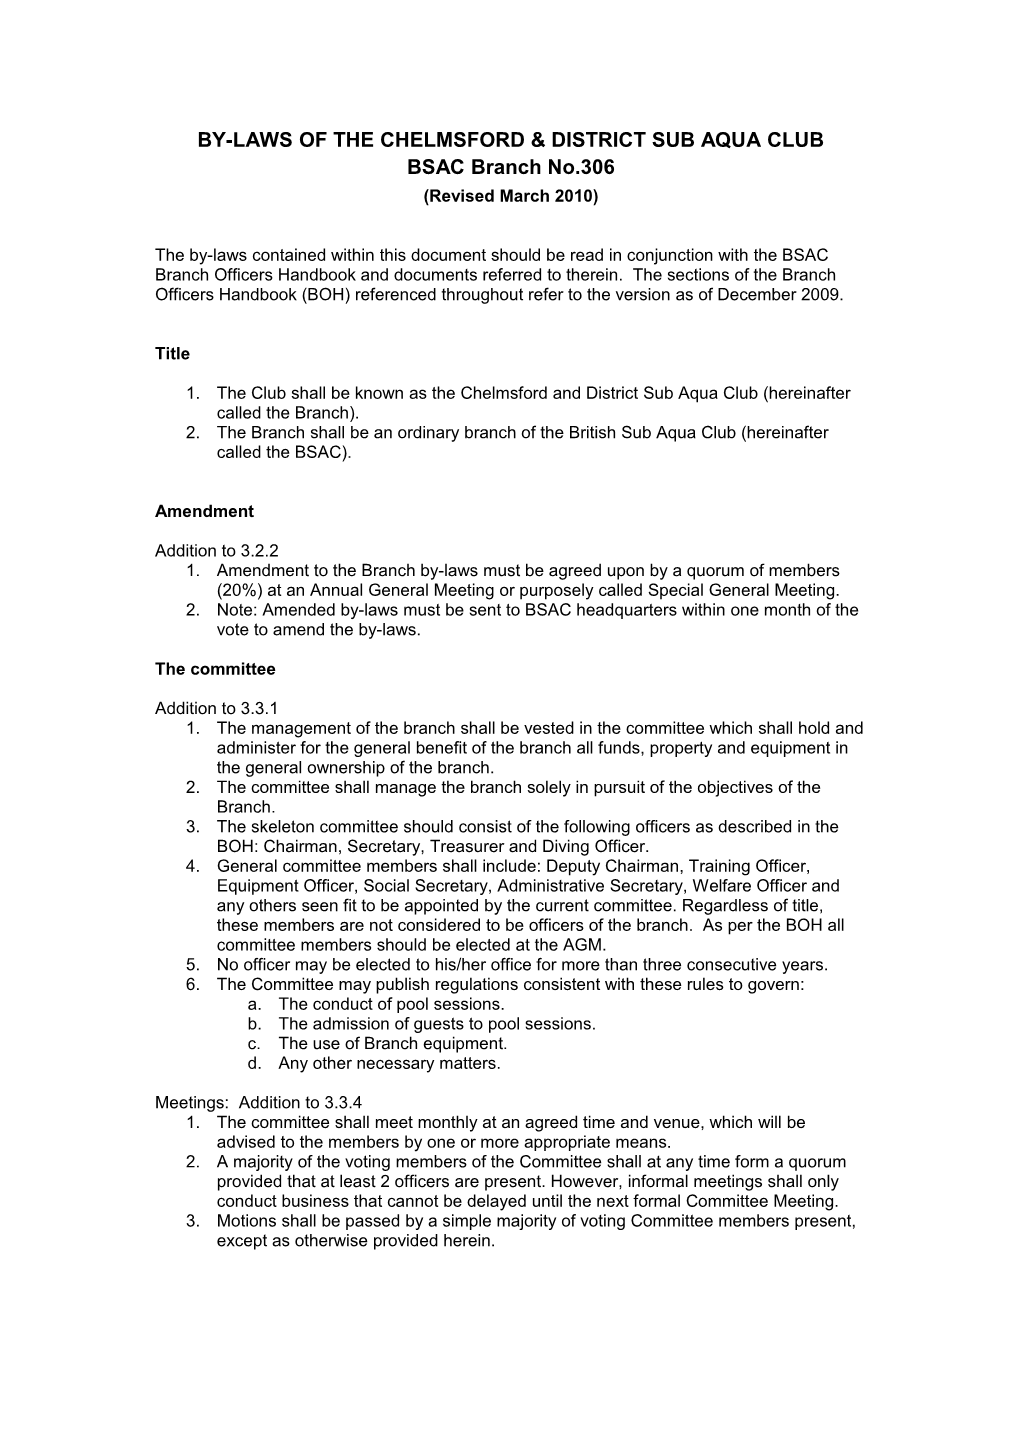 This Document Contains the By-Laws for BSAC Branch 0306 Chelmsford & District Sub-Aqua